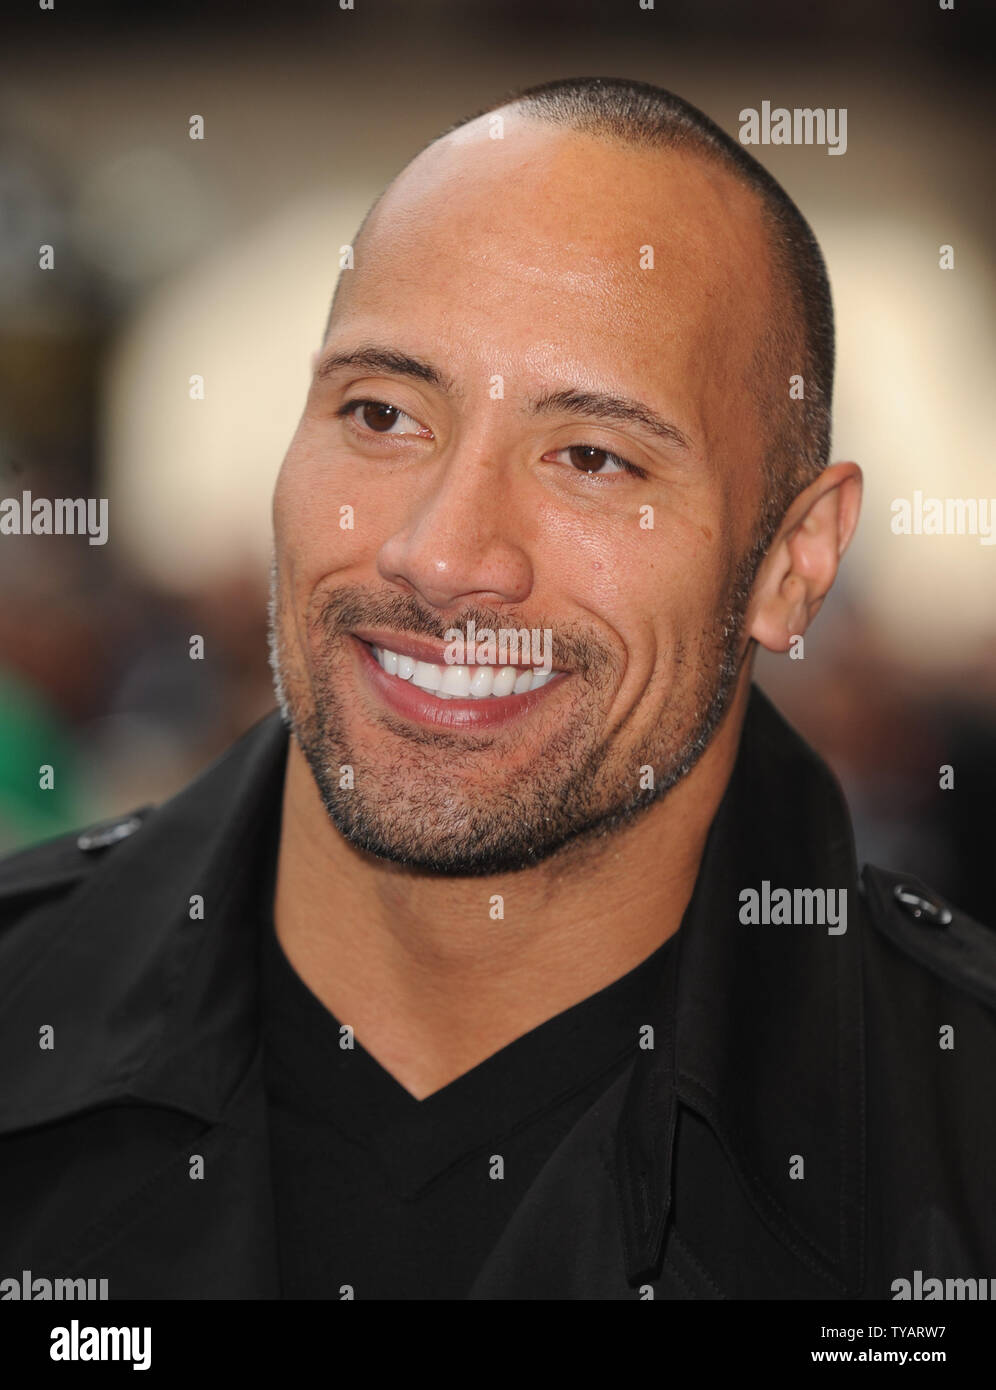 American actor Dwayne Johnson attends the premiere of 'Race To Witch Mountain' at Odeon West End, Leicester Square in London on April 5, 2009.  (UPI Photo/Rune Hellestad) Stock Photo